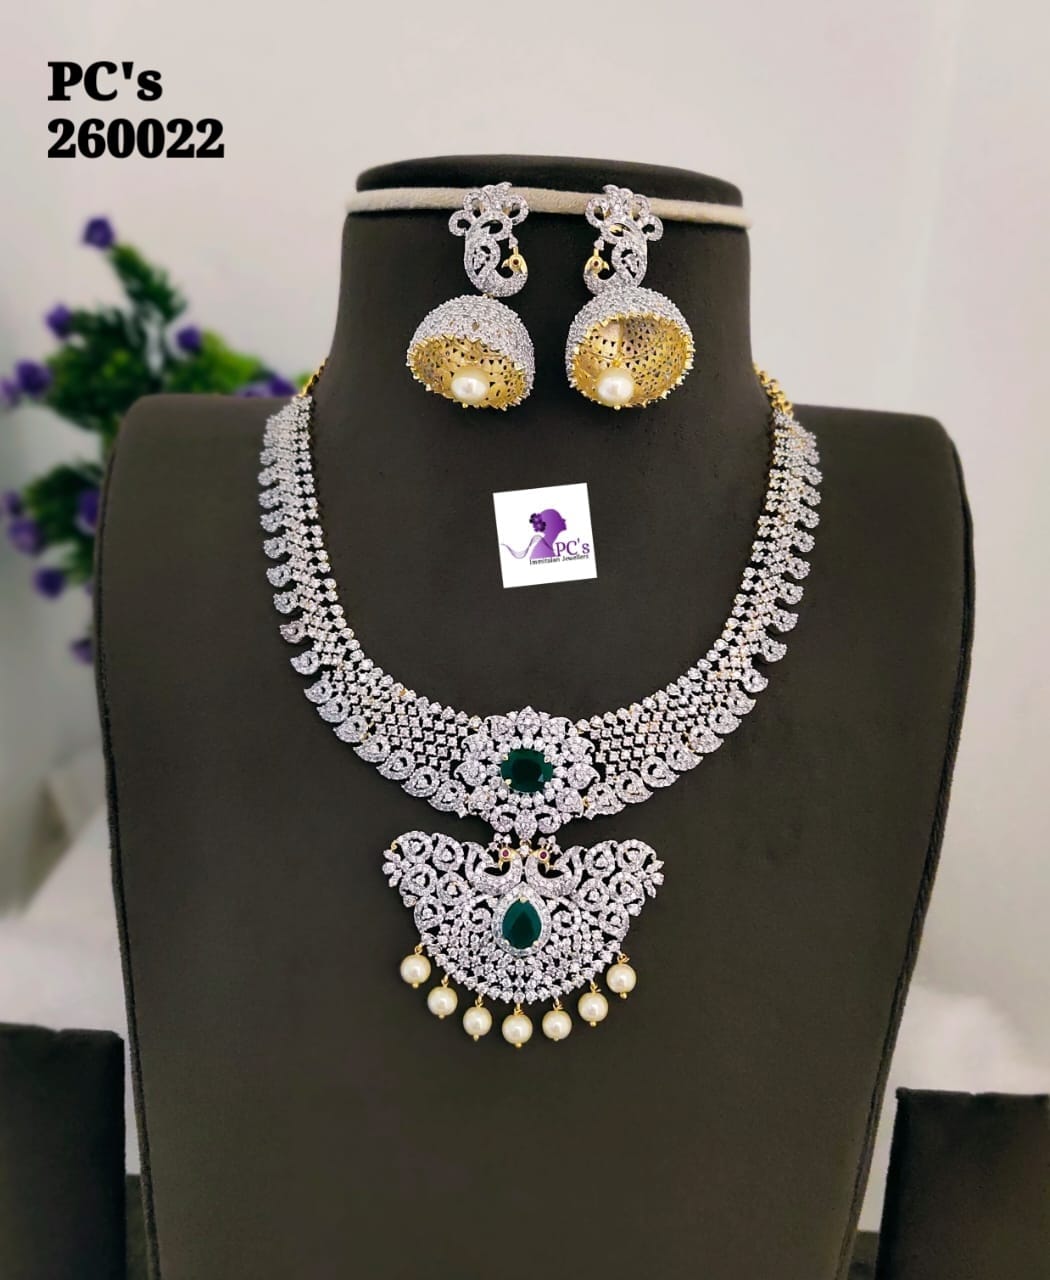 New October Collection 2020 - Indian Jewelry Designs